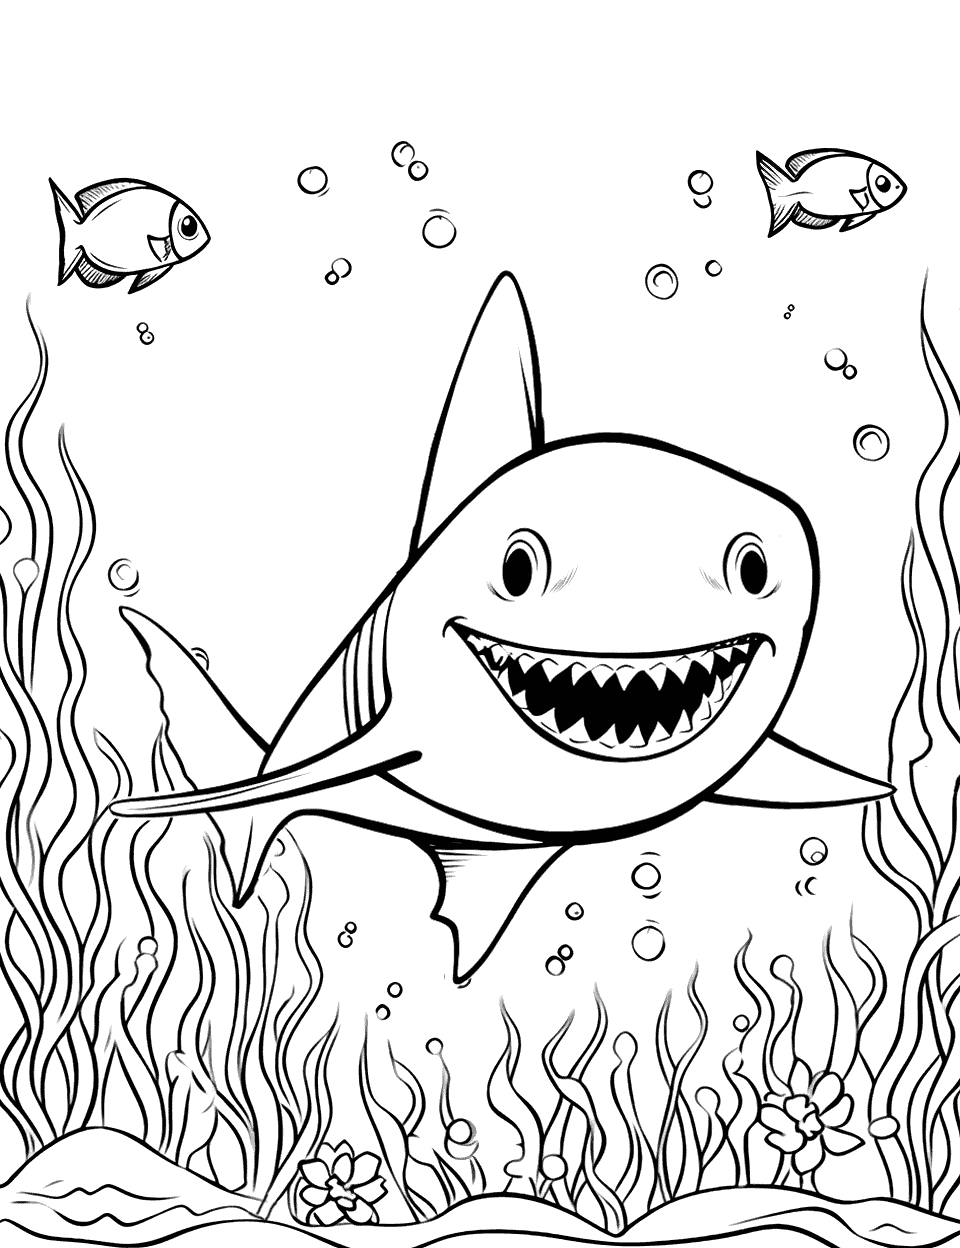 Sea Exploration Baby Shark Coloring Page - Baby Shark swimming near a coral reef, full of marine life.